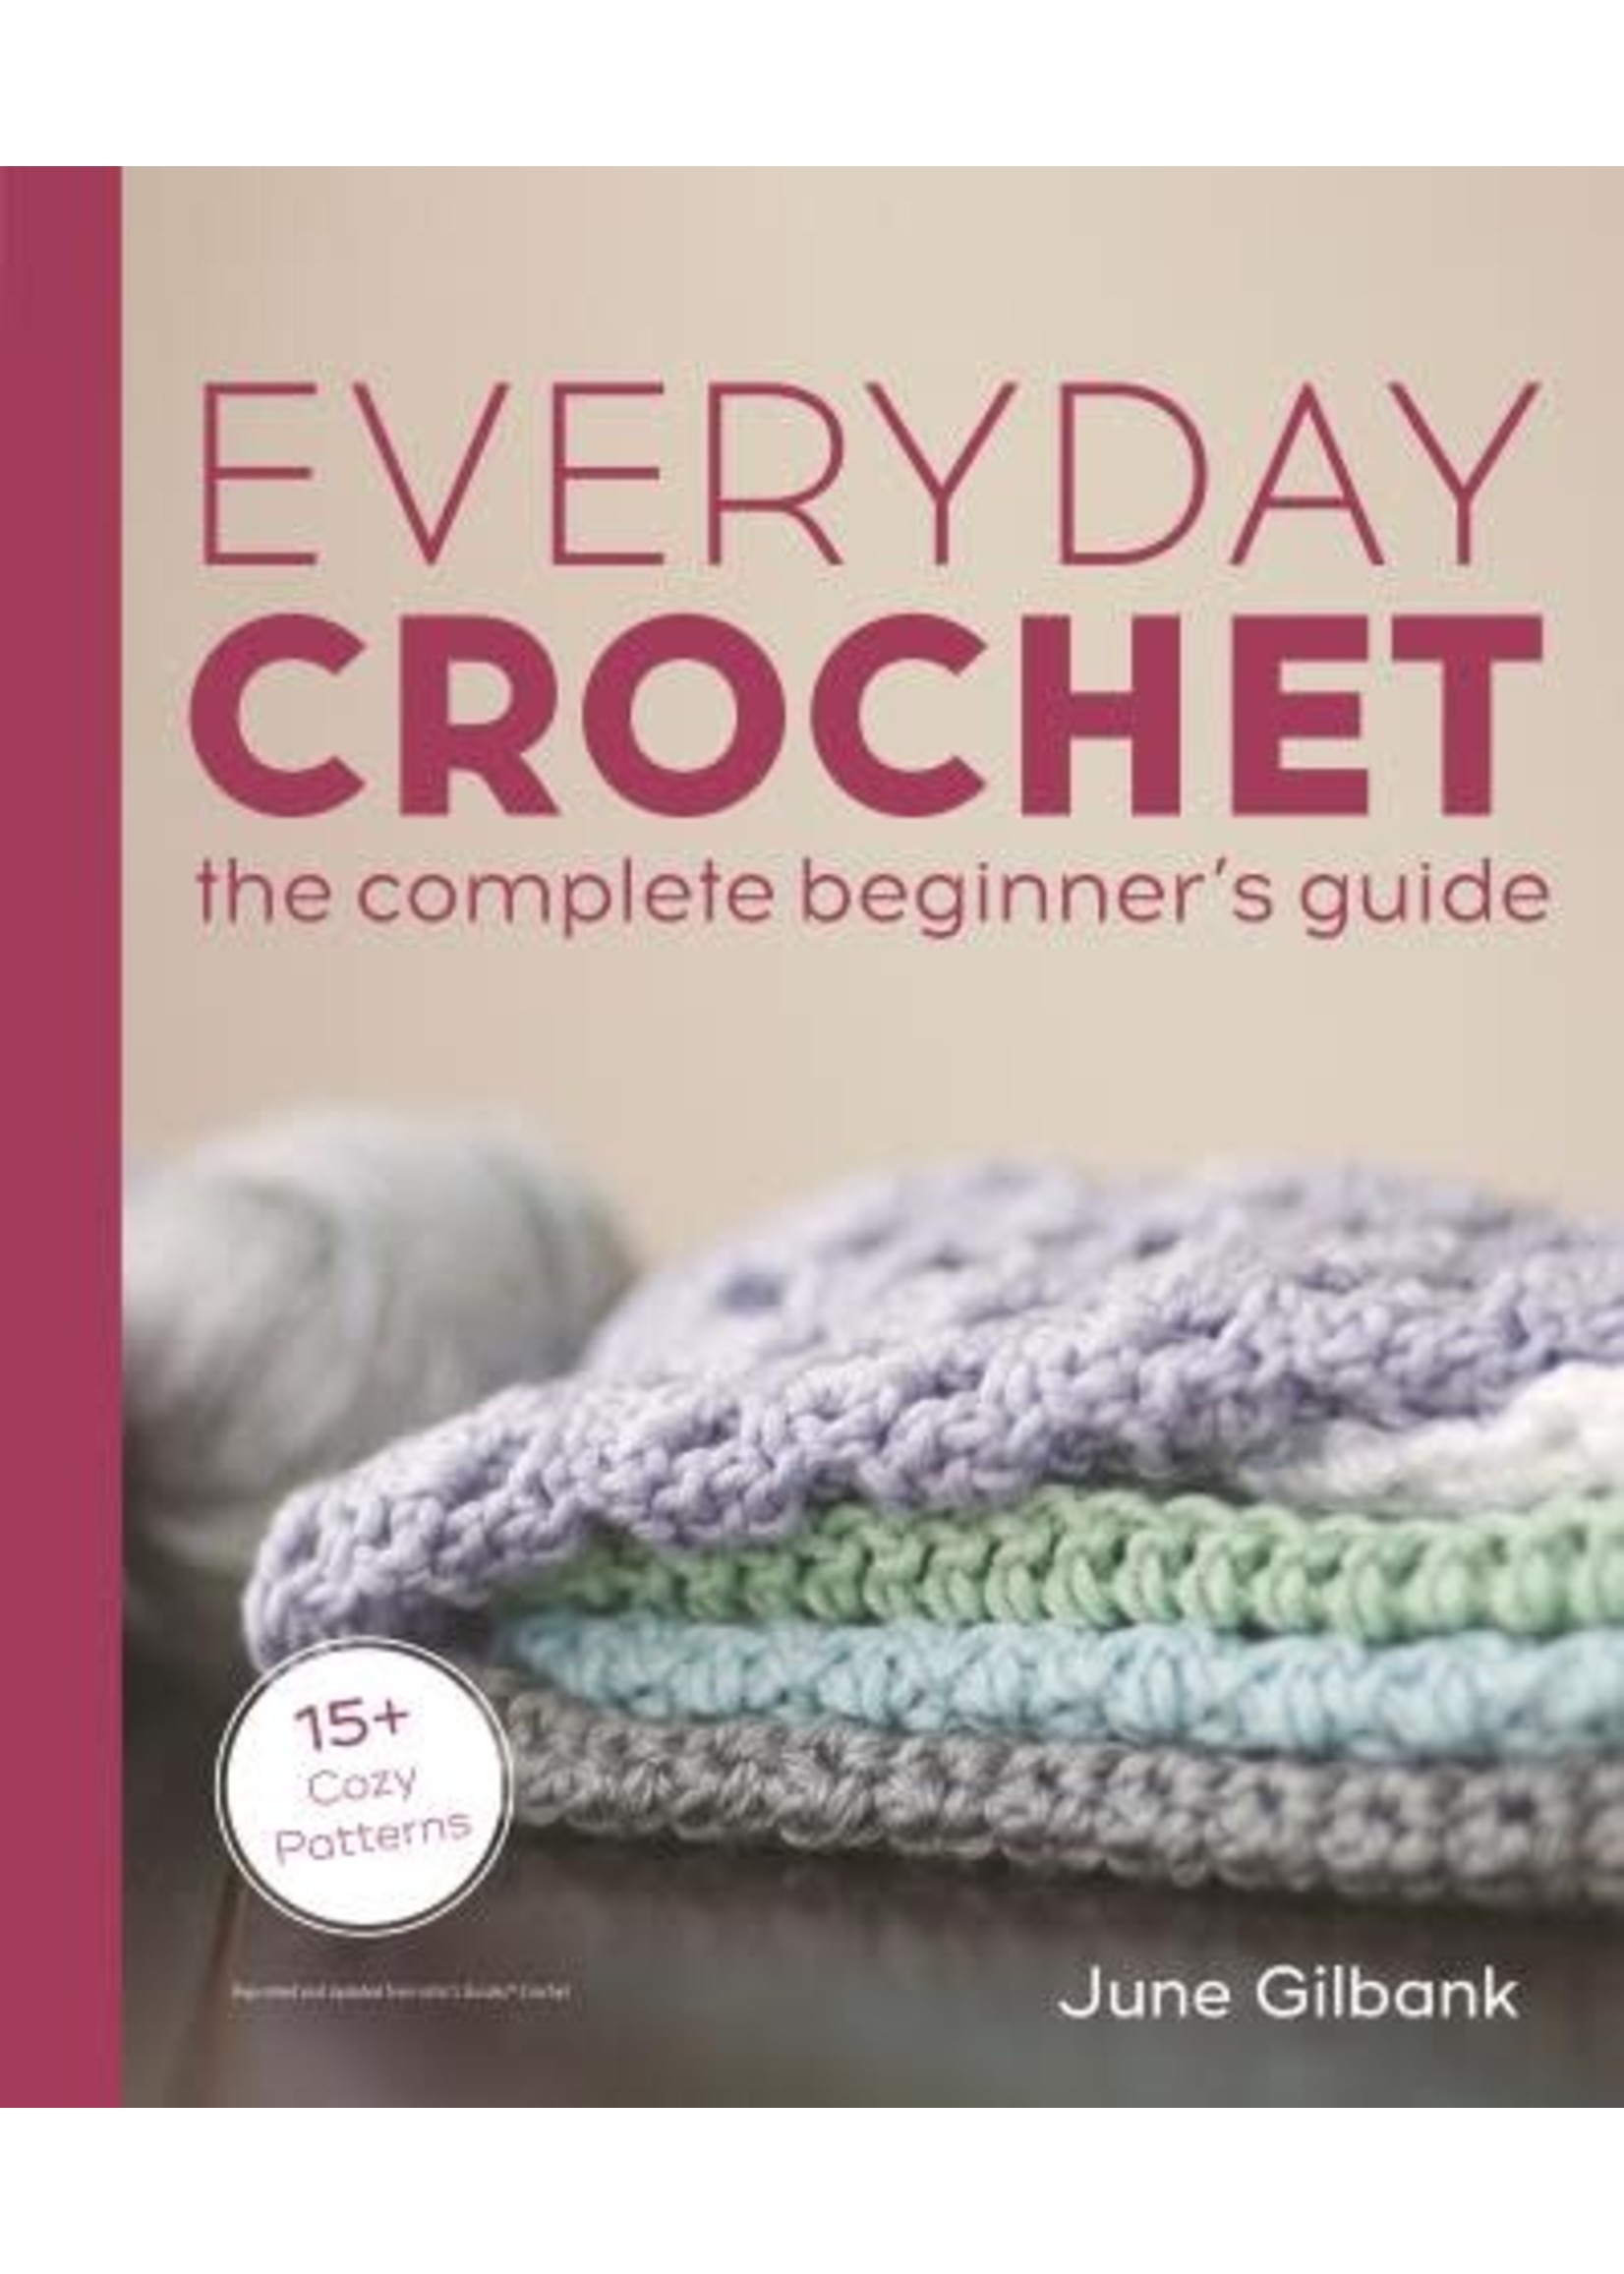 Everyday Crochet: The Complete Beginner's Guide 15+ Cozy Patterns by June Gilbank